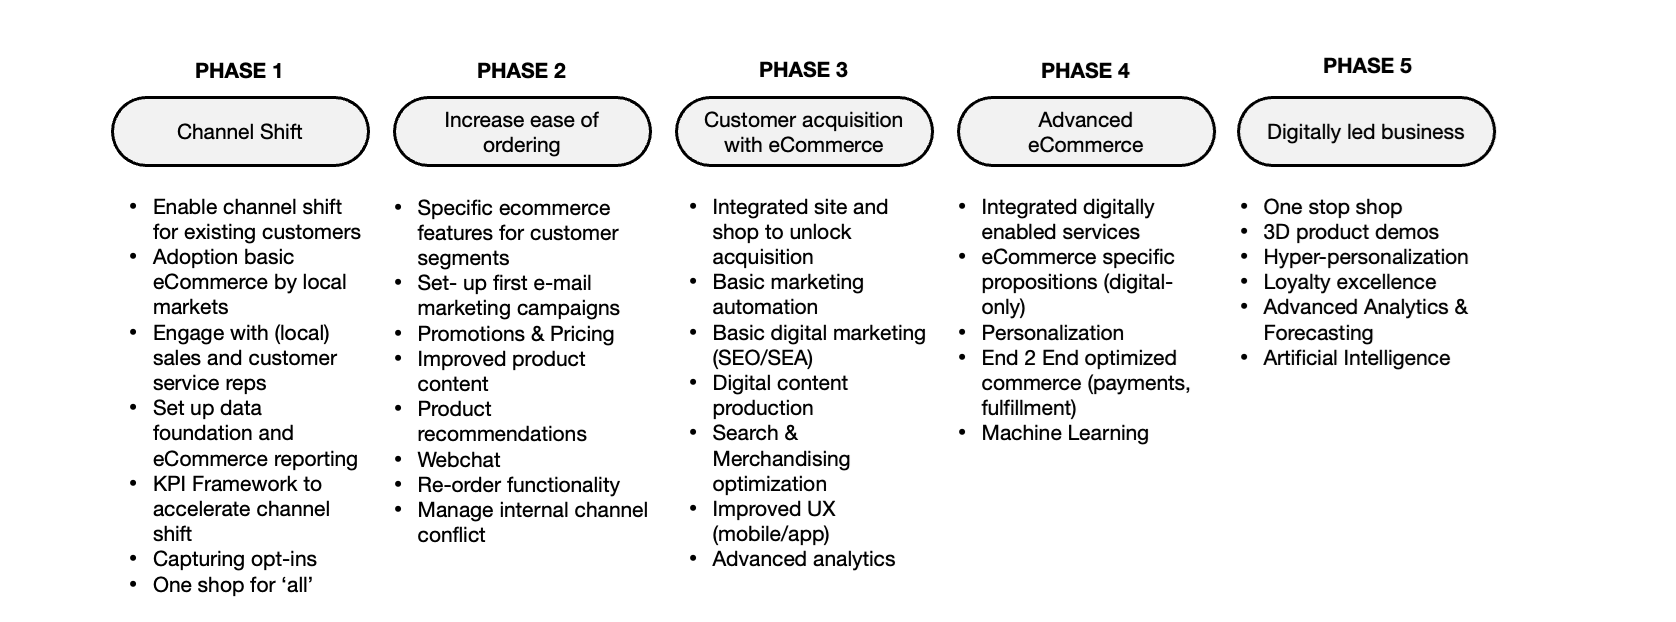 02 Phases of eCommerce.png